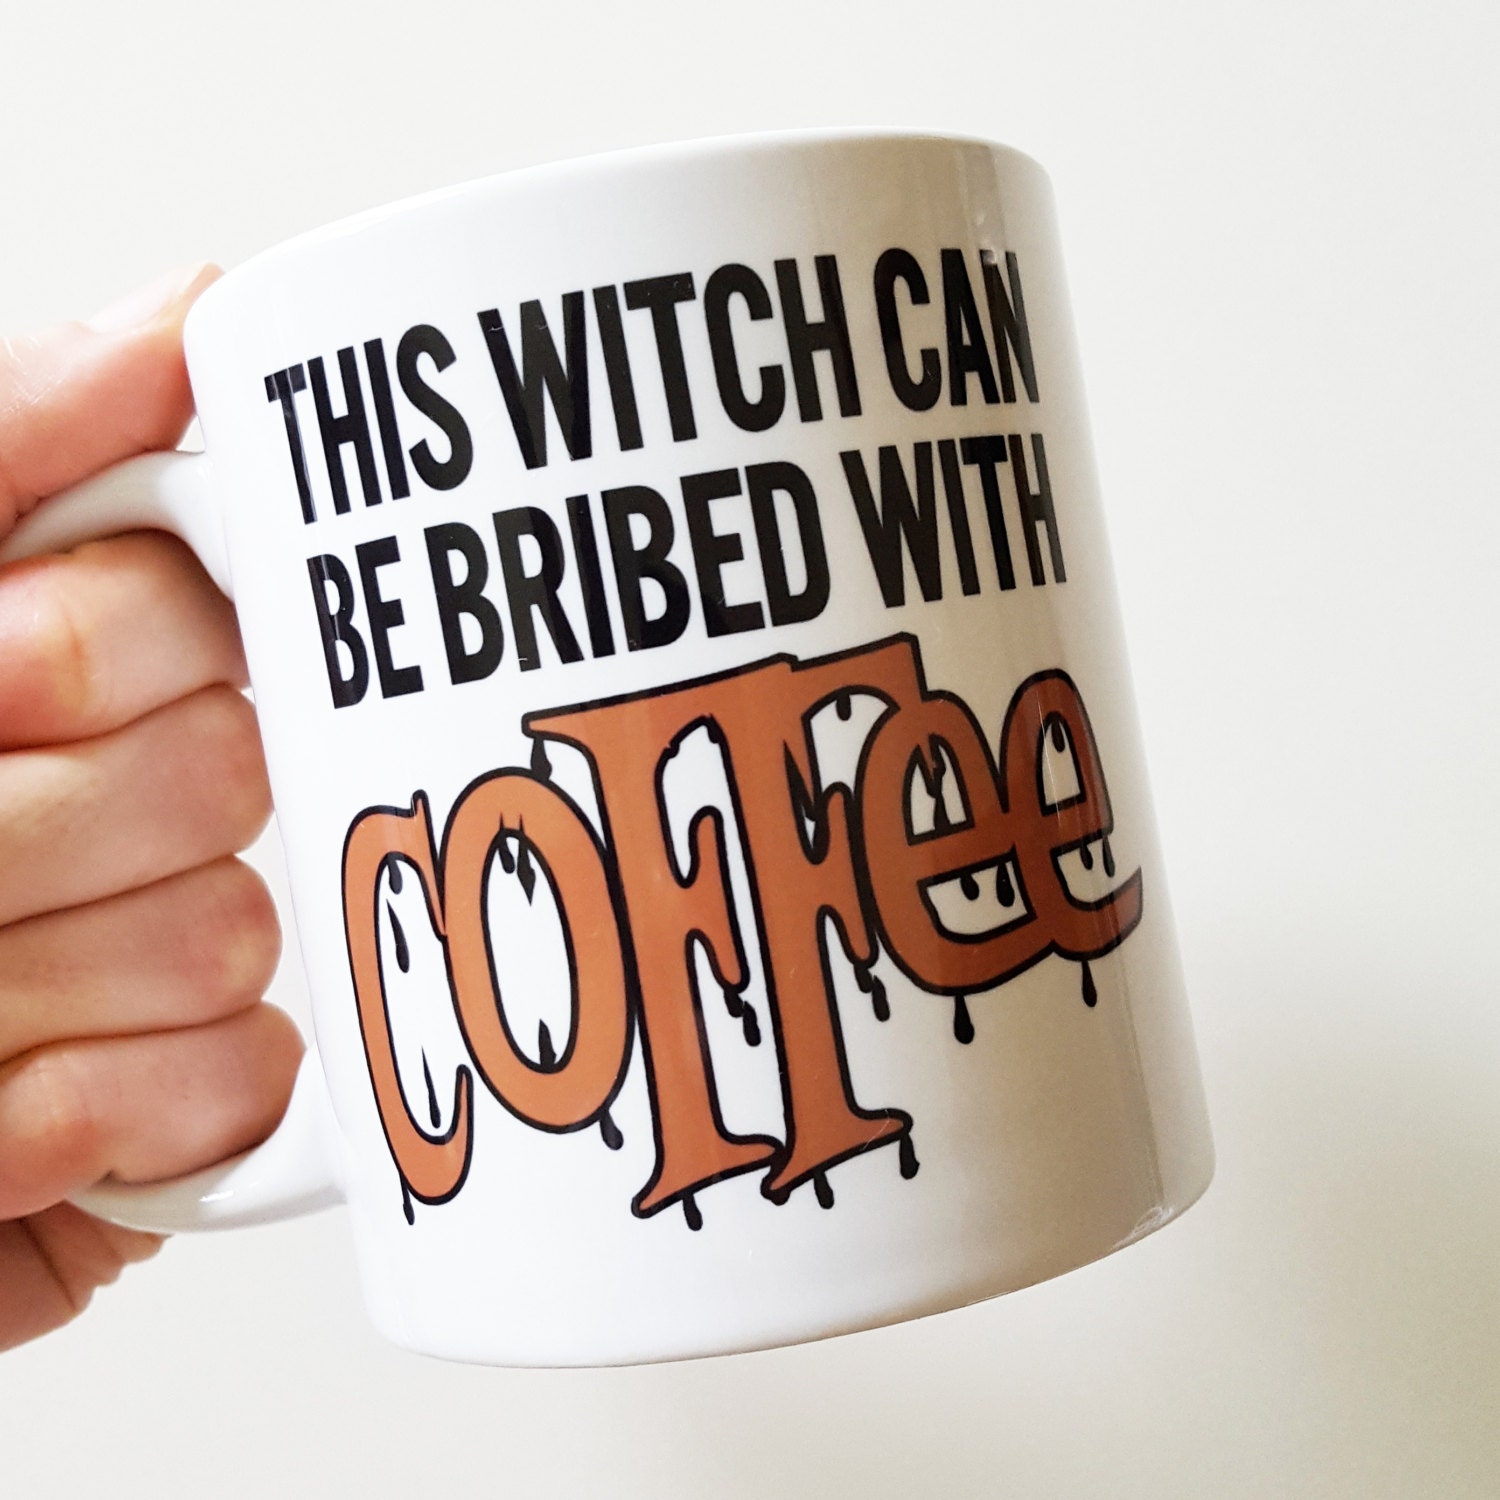 Handmade This Witch Can Be Brided With Coffee Mug ...